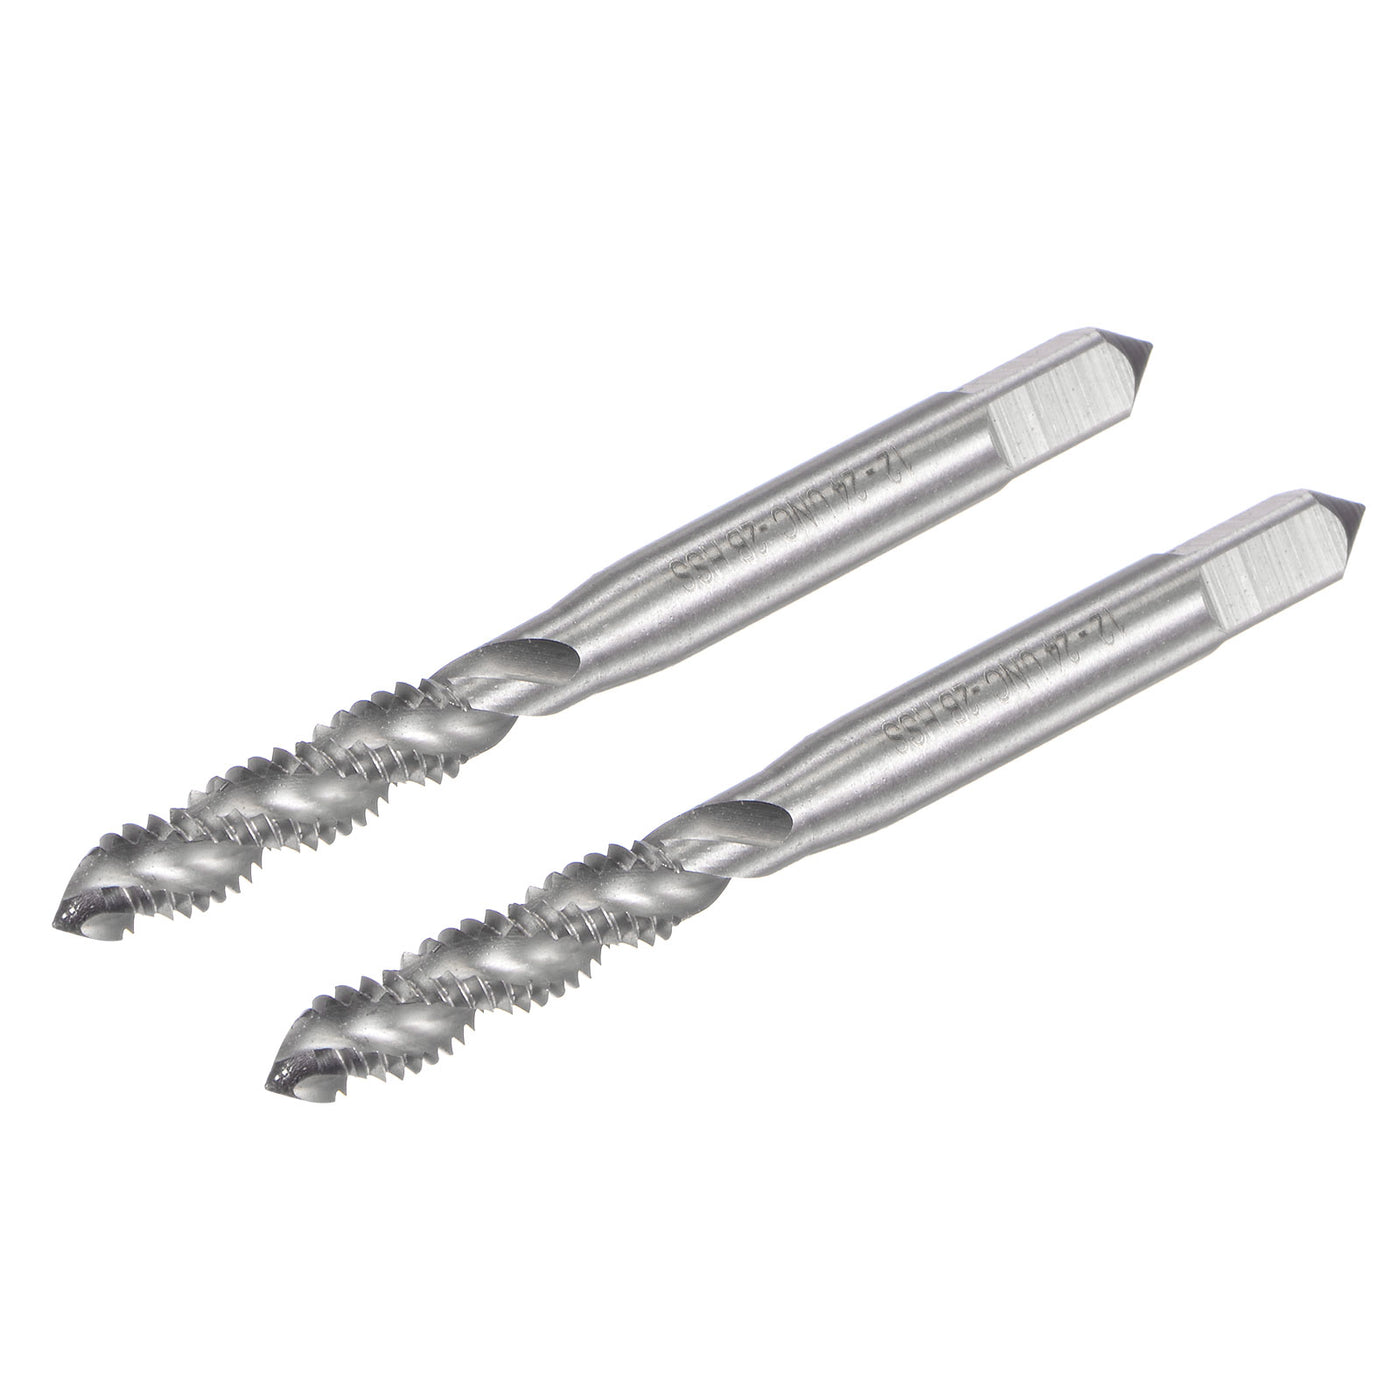 uxcell Uxcell 12-24 UNC 2B High Speed Steel Uncoated Machine Spiral Flute Threading Tap 2pcs